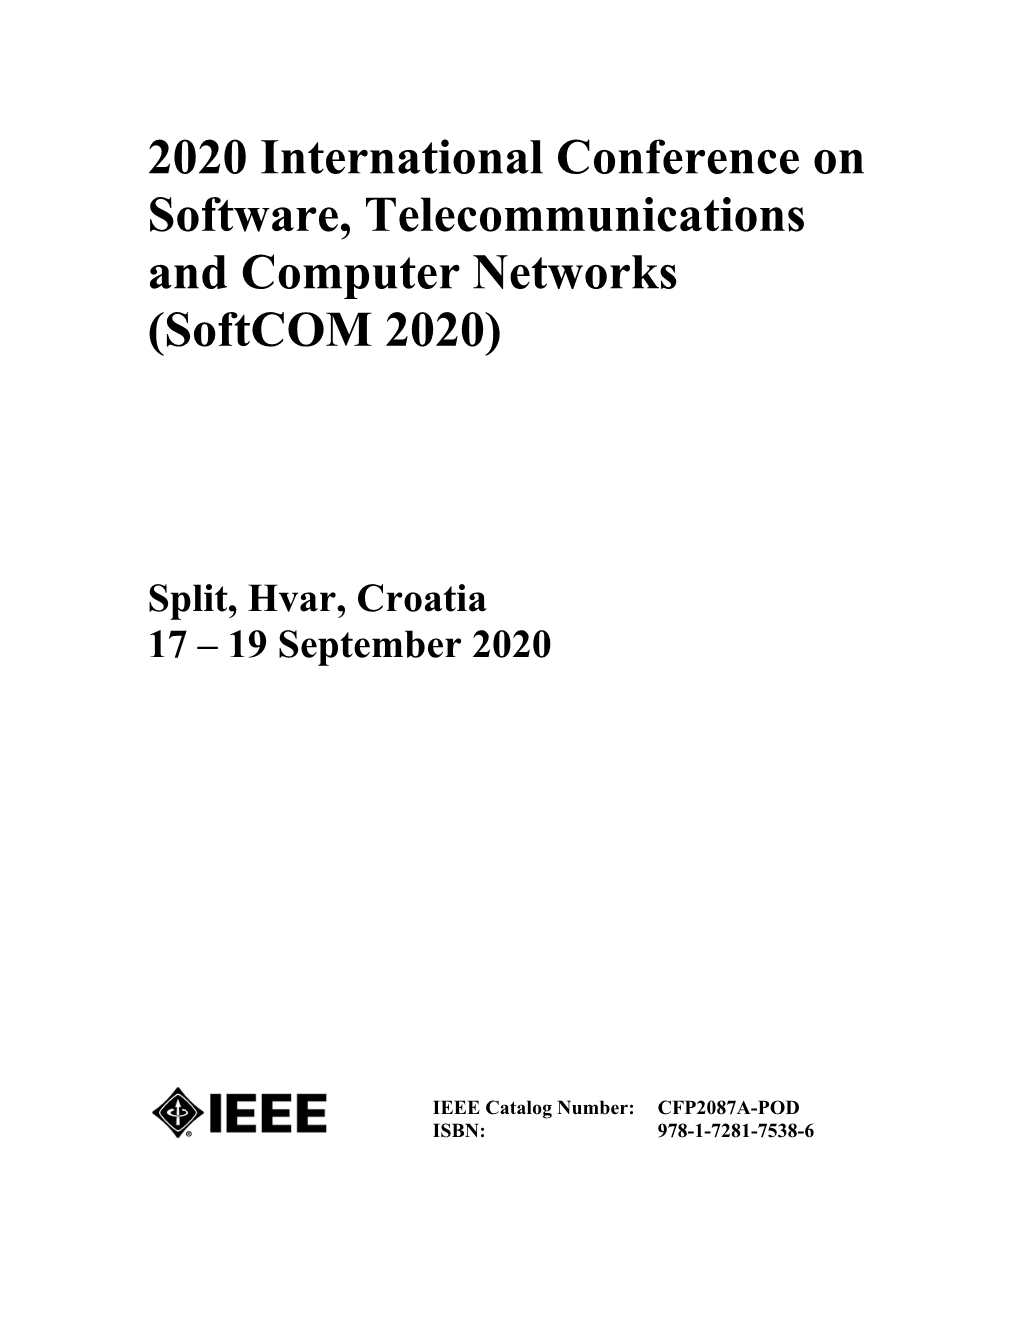 2020 International Conference on Software, Telecommunications and Computer Networks